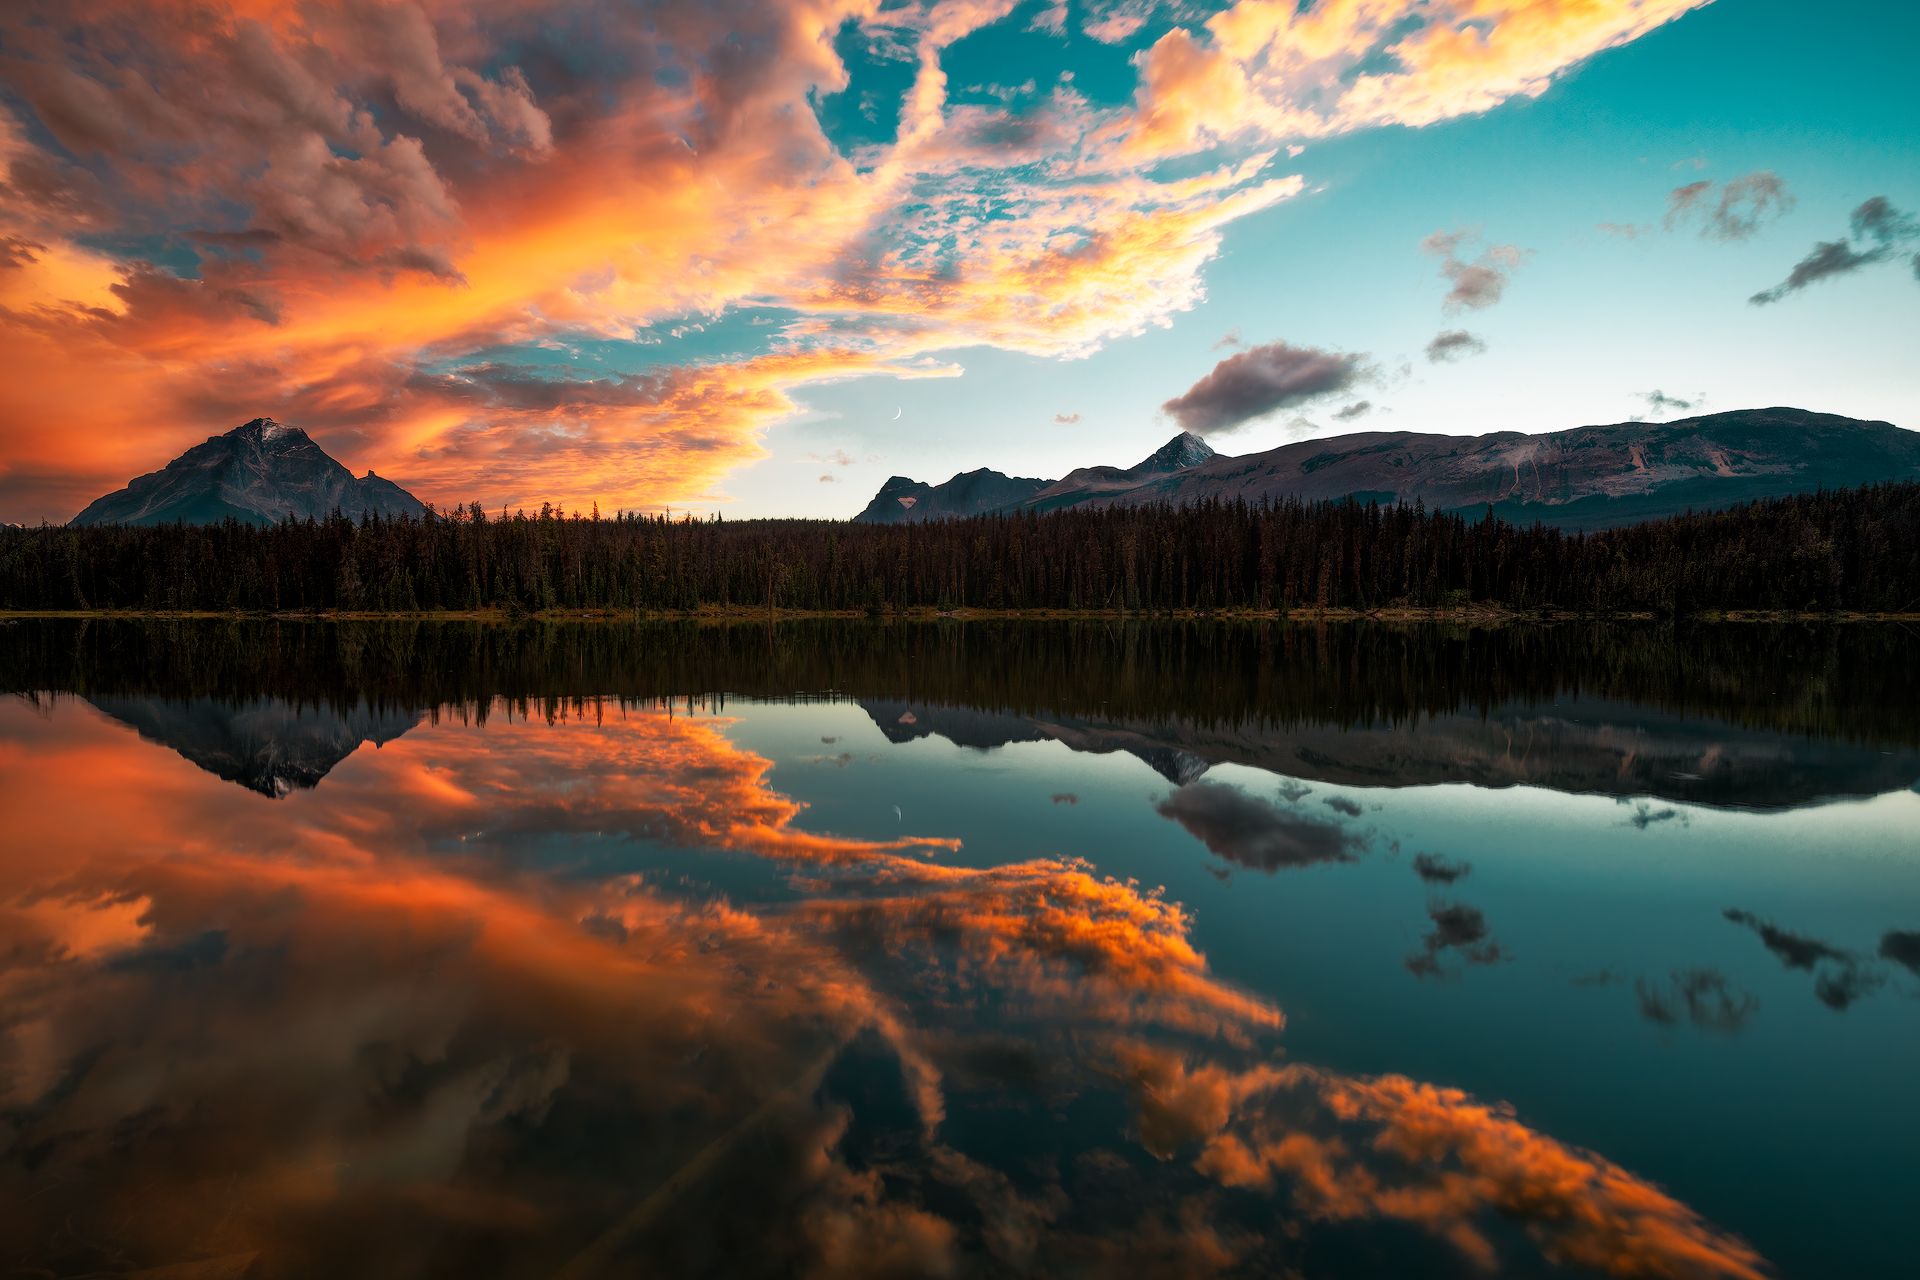 landscape, sunset, reflection, mirror, moon, sun, mountain, forest, tree, water, lake, river, cloud, outdoor, glow, snow, Huapu Zhao